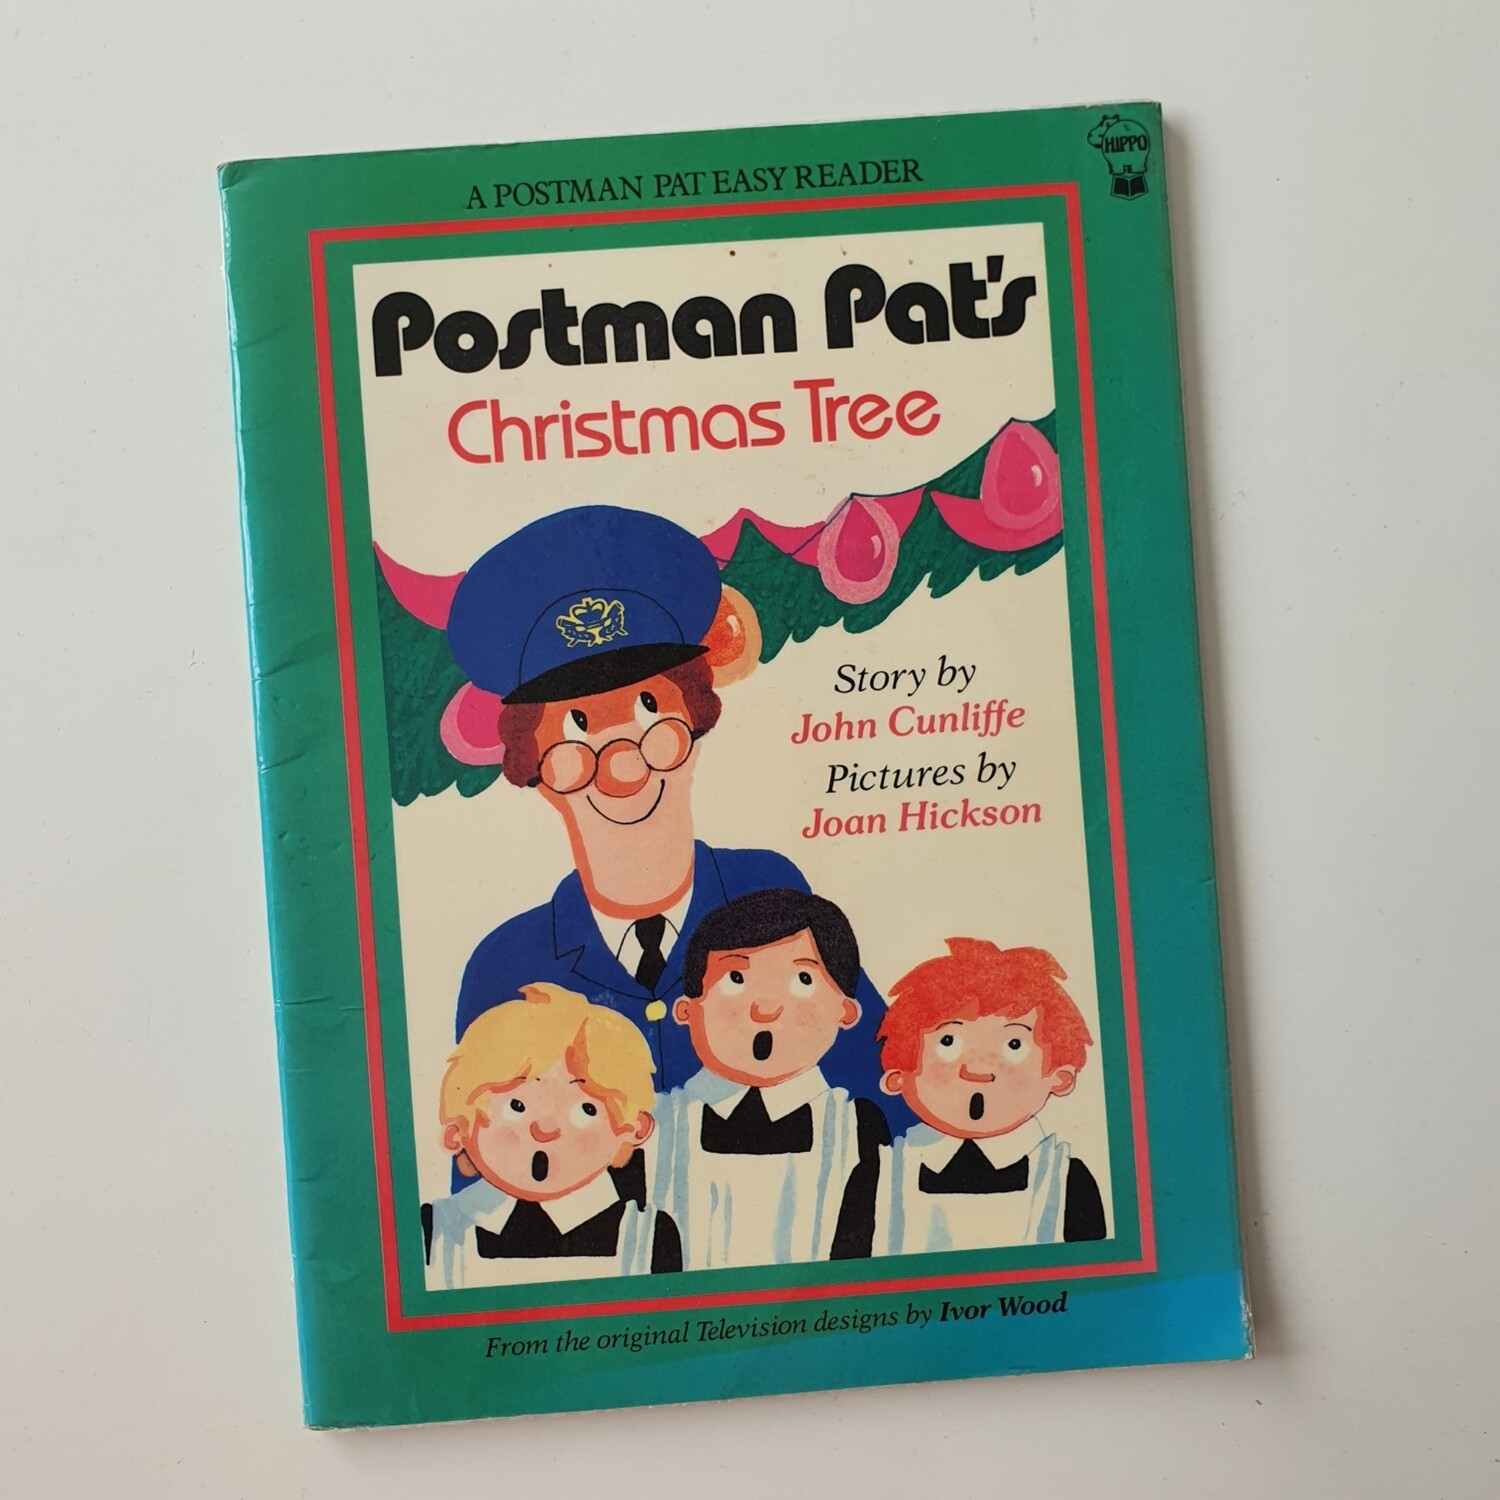 Postman Pat and the Christmas Tree Notebook - made from a paperback book, comes with book corners